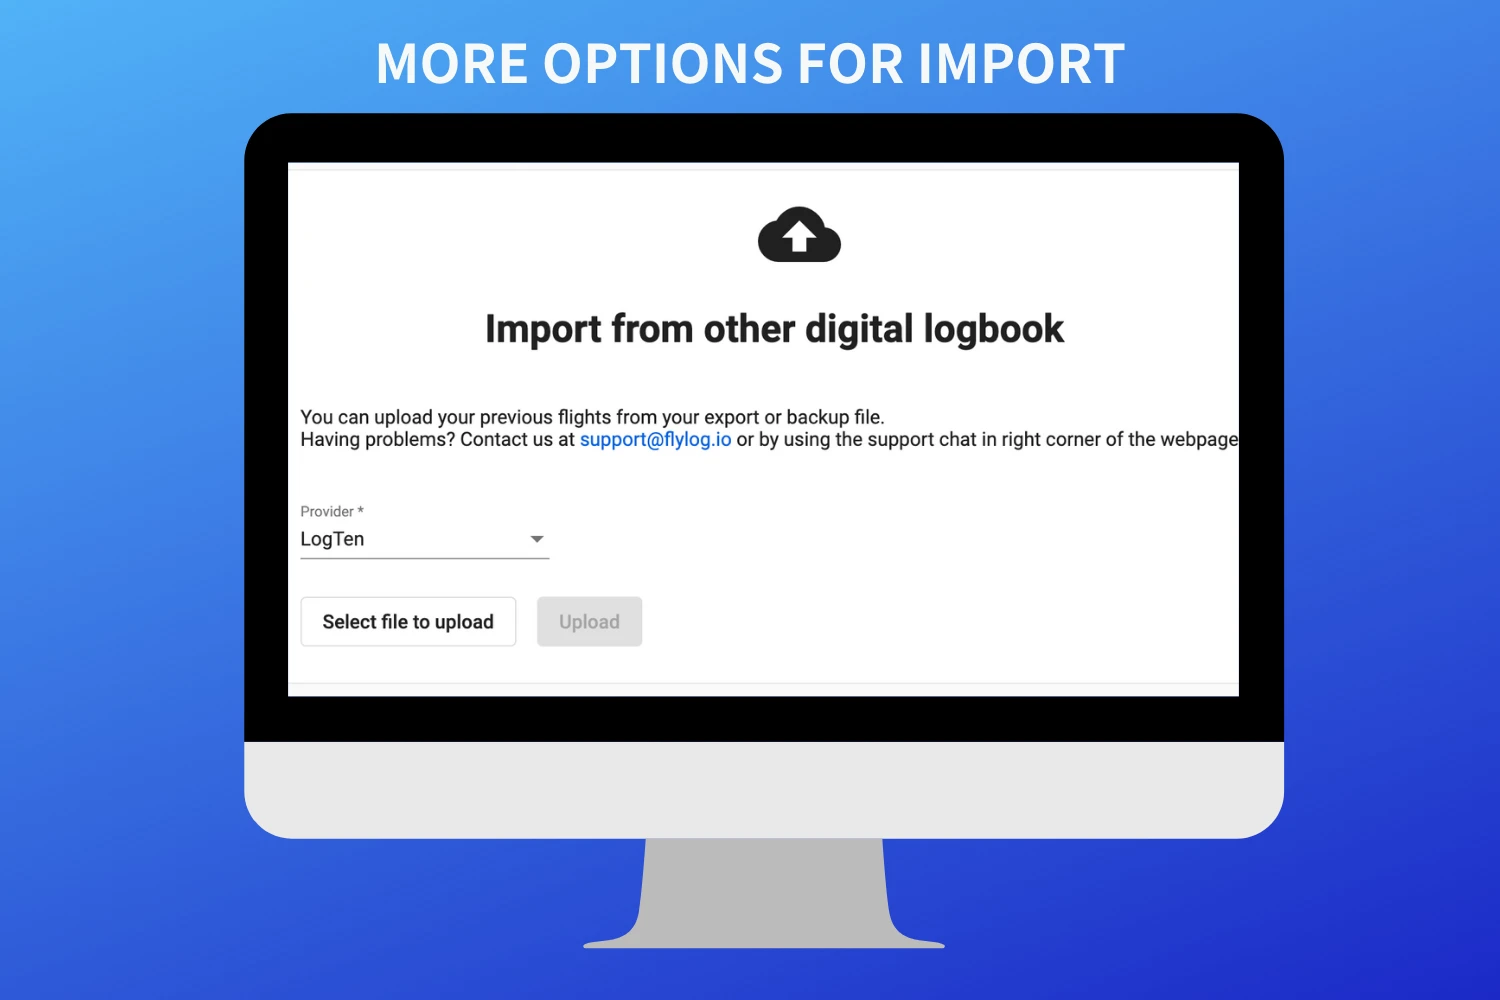 More options to import your previous experience